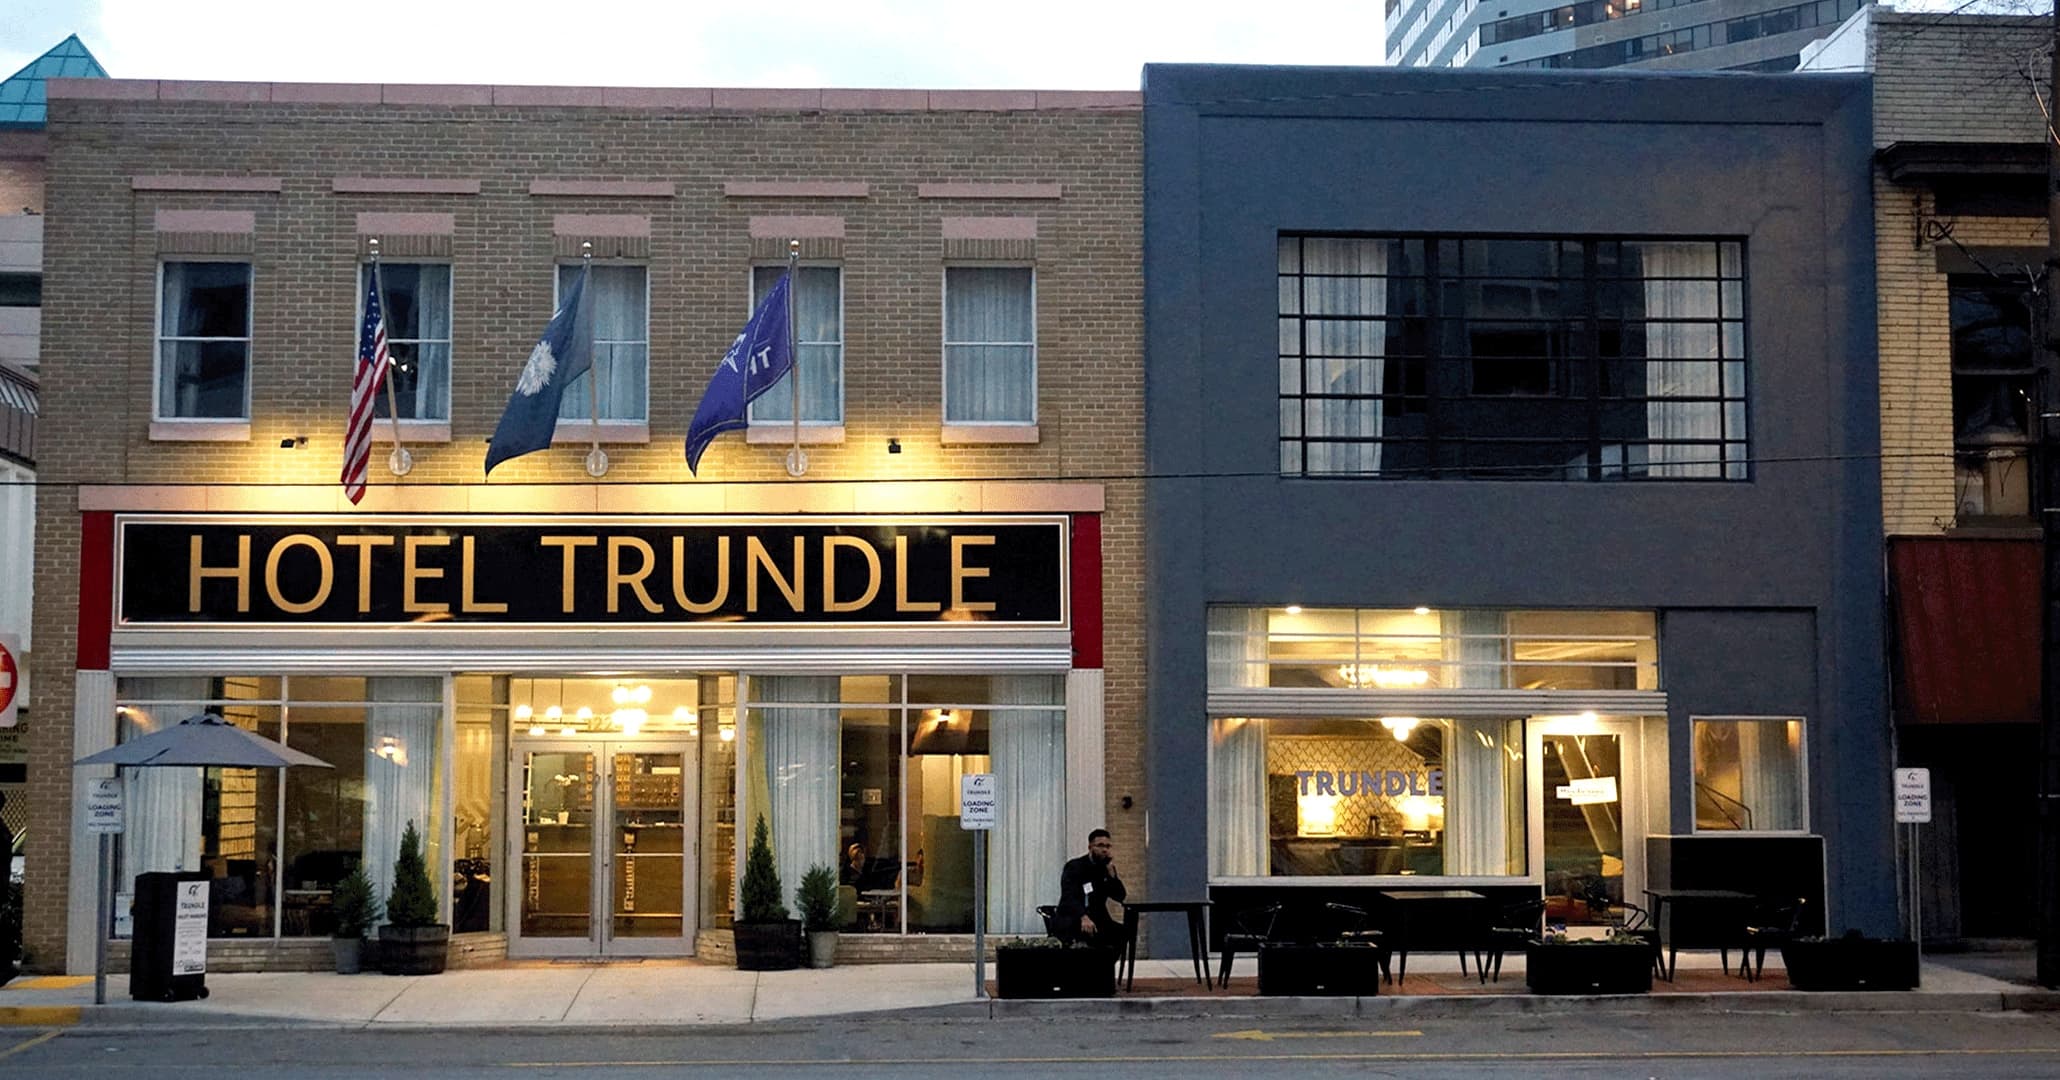 Boudreaux architects worked with Hotel Trundle to rehabilitate a historic property.